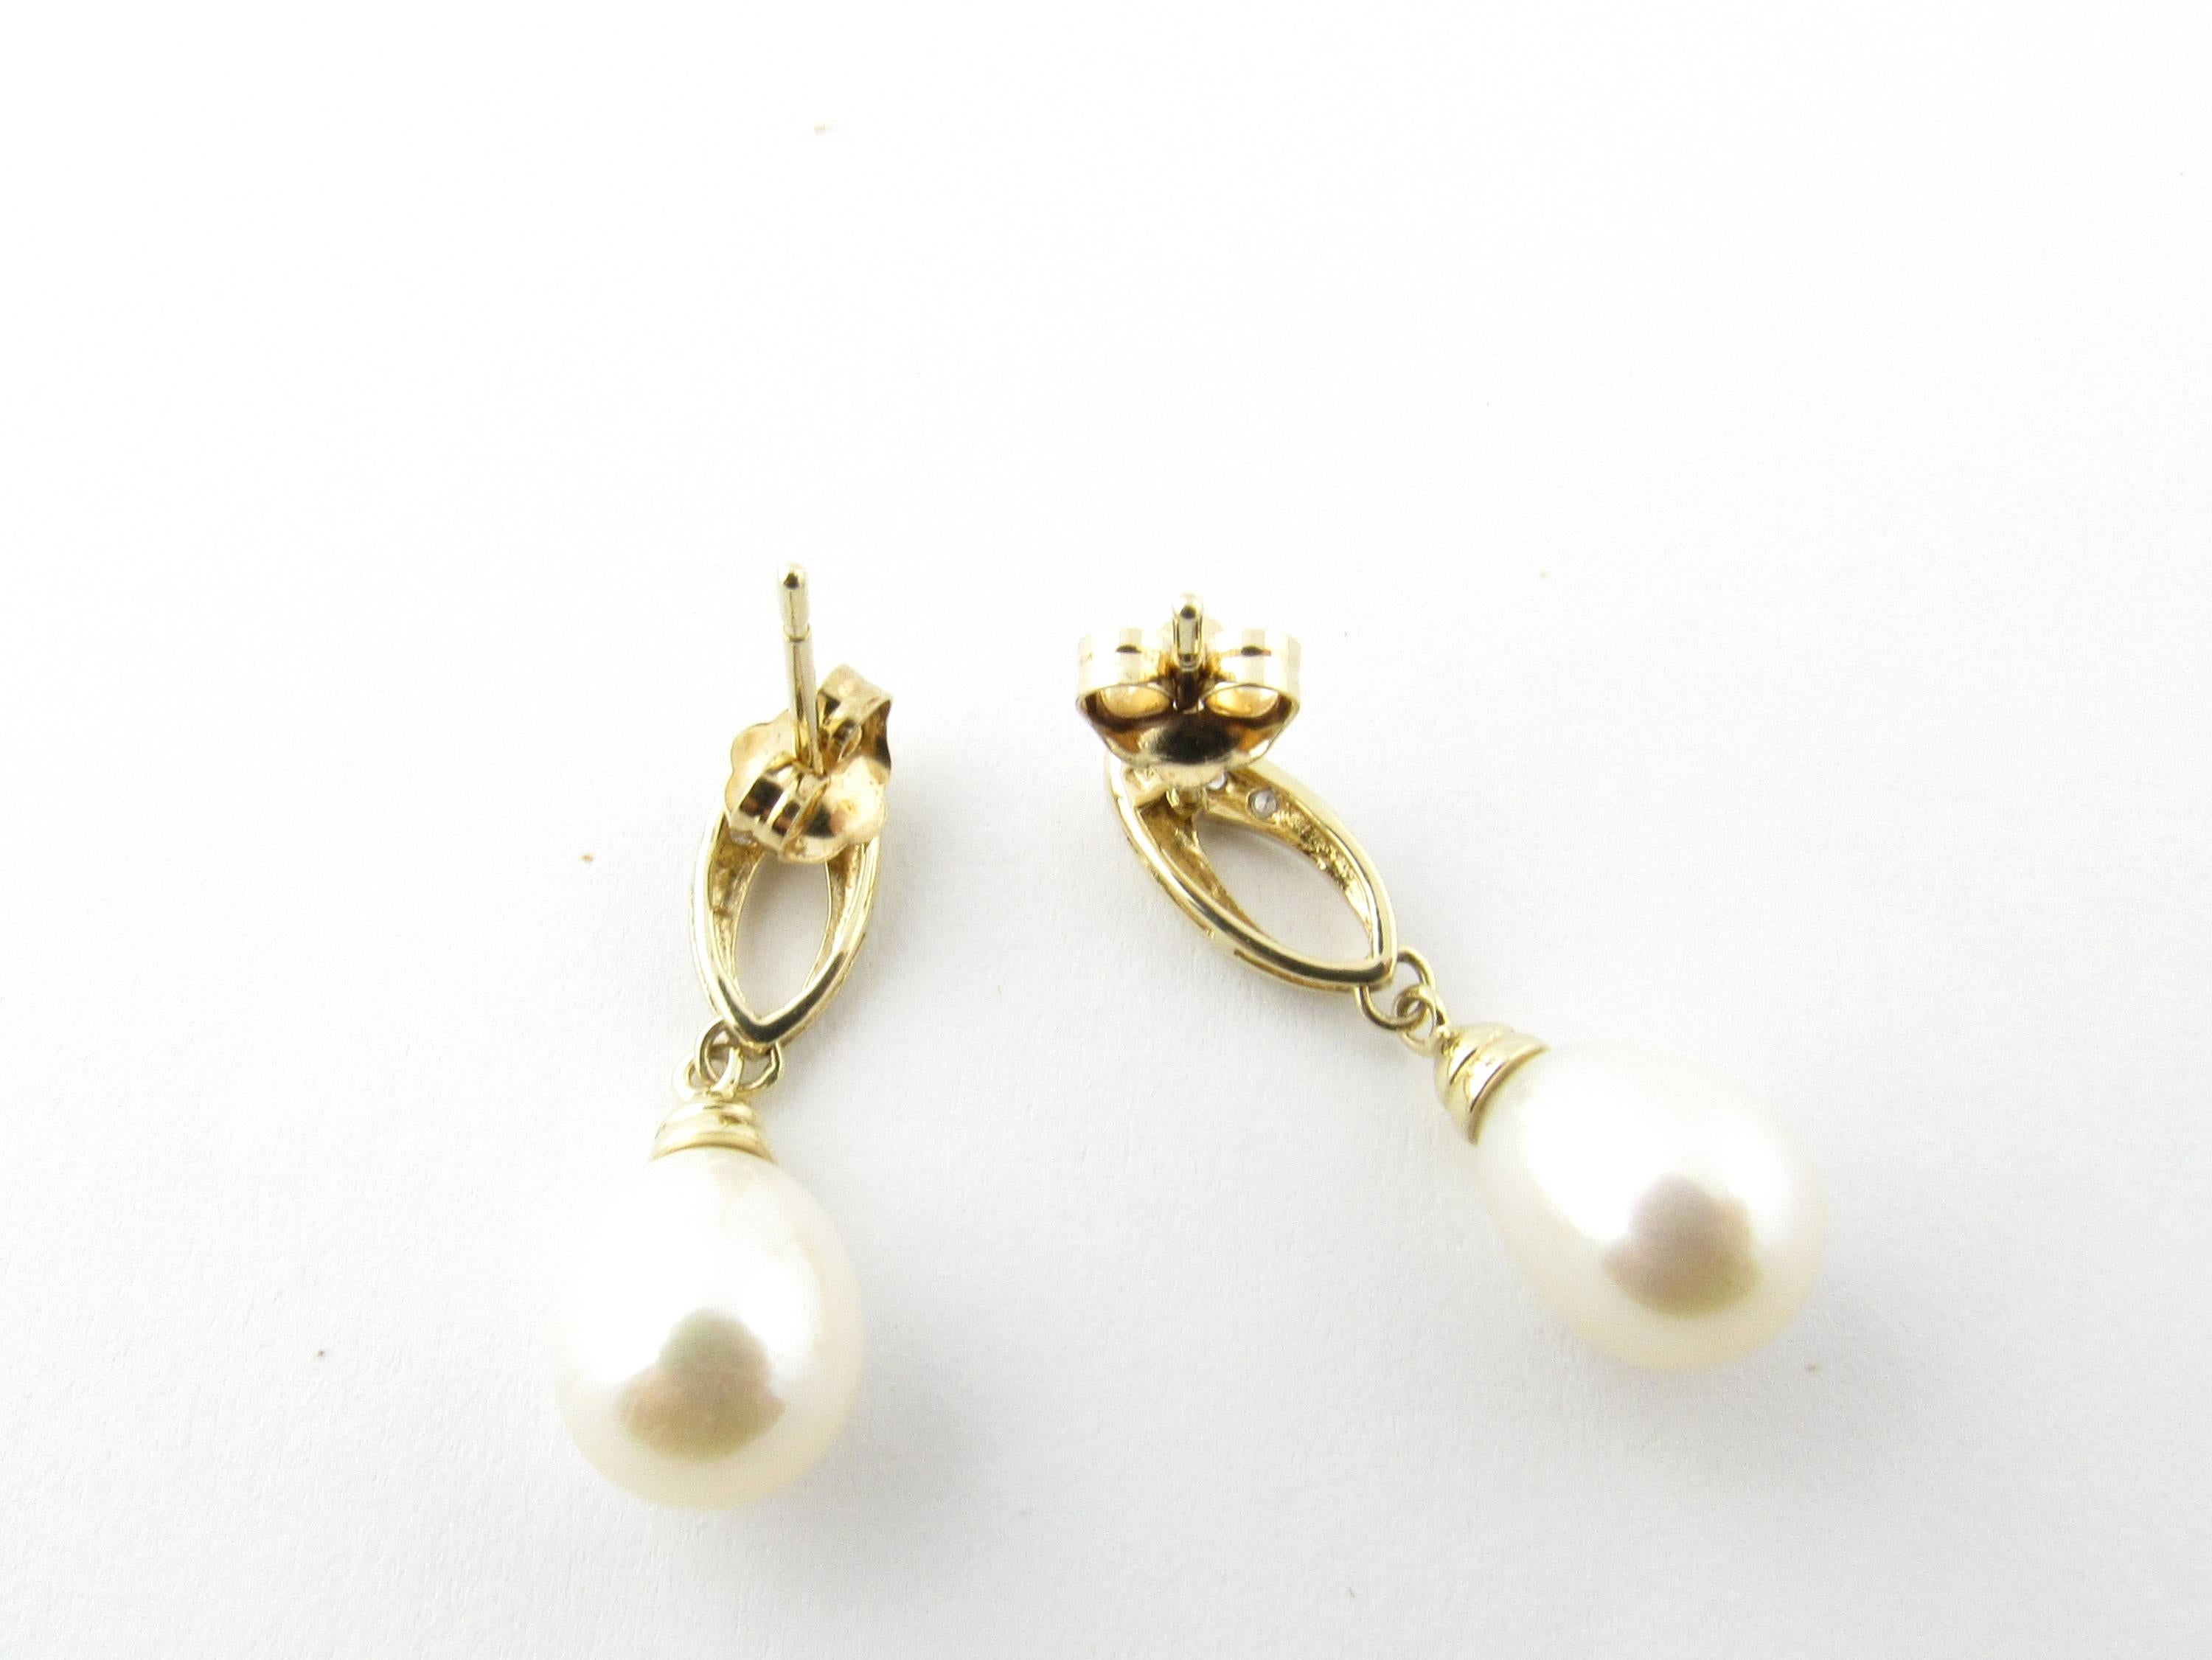 Vintage 14 Karat Yellow Gold Pearl and Diamond Earrings- 
These lovely dangling earrings each feature one teardrop pearl (8 mm each) accented with three round brilliant cut diamonds and set in 14K yellow gold. 
Approximate total diamond weight: .05